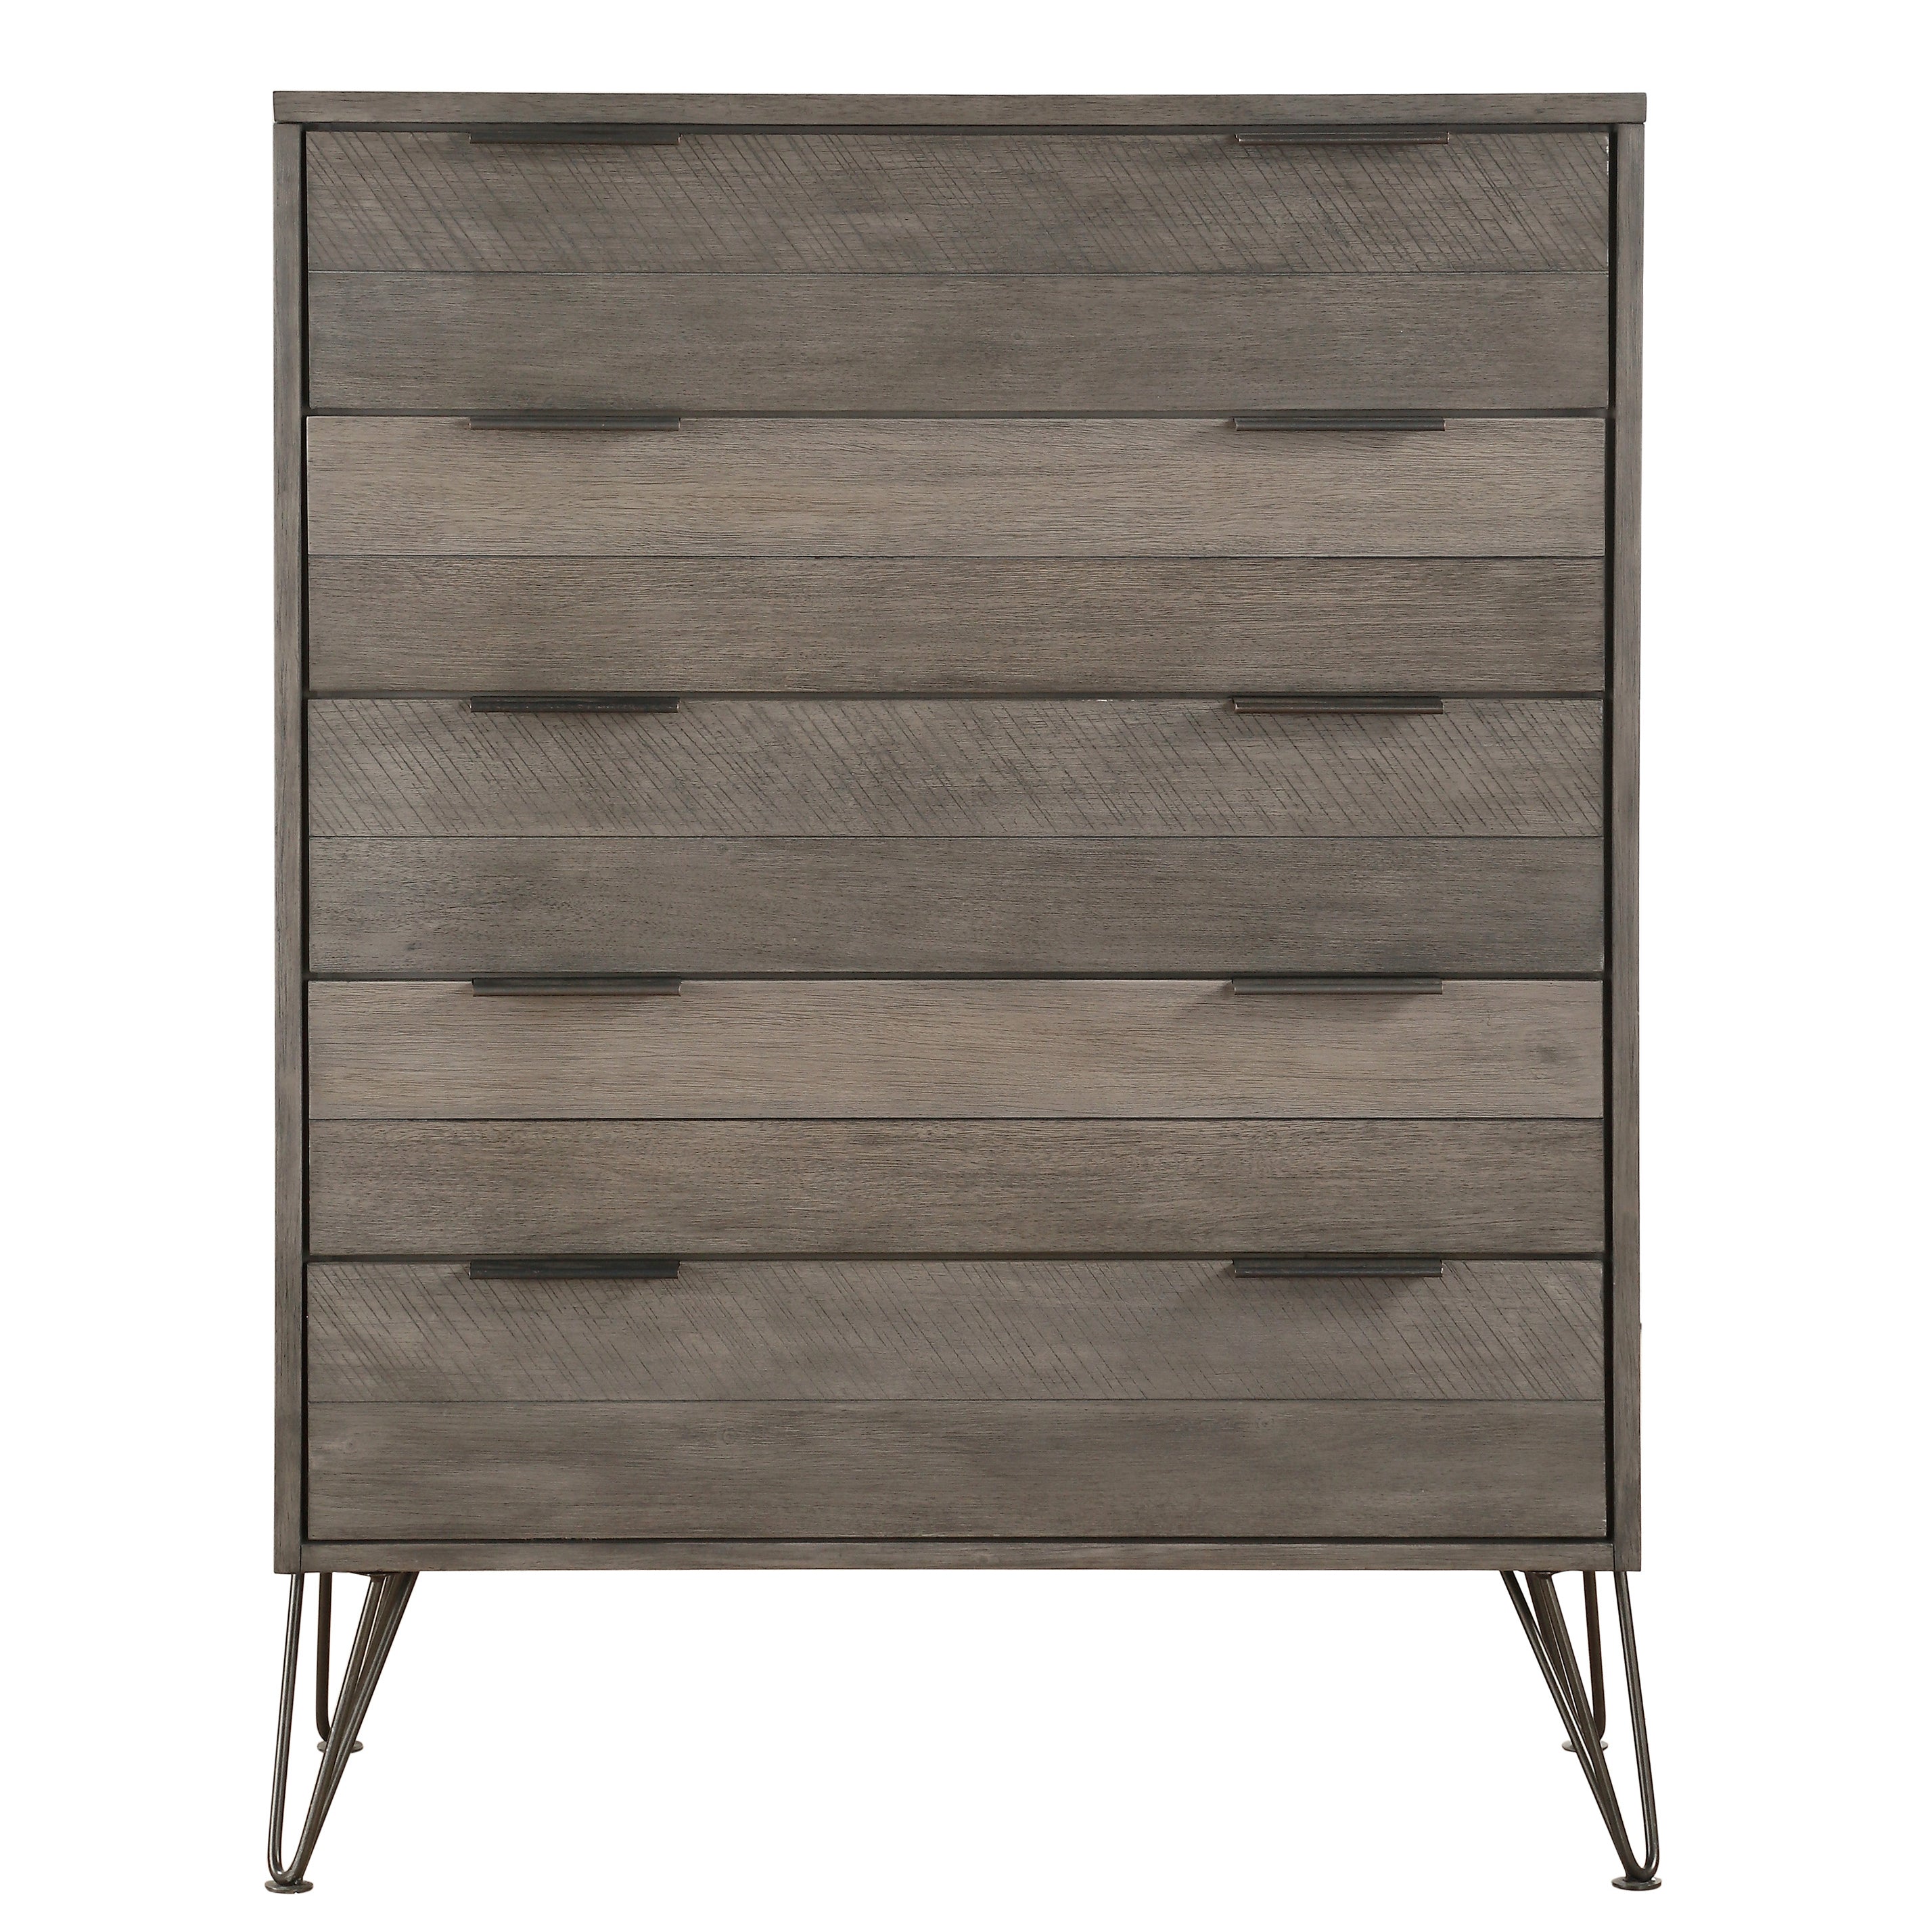 Drawers Perched atop Metal Legs (Gray)